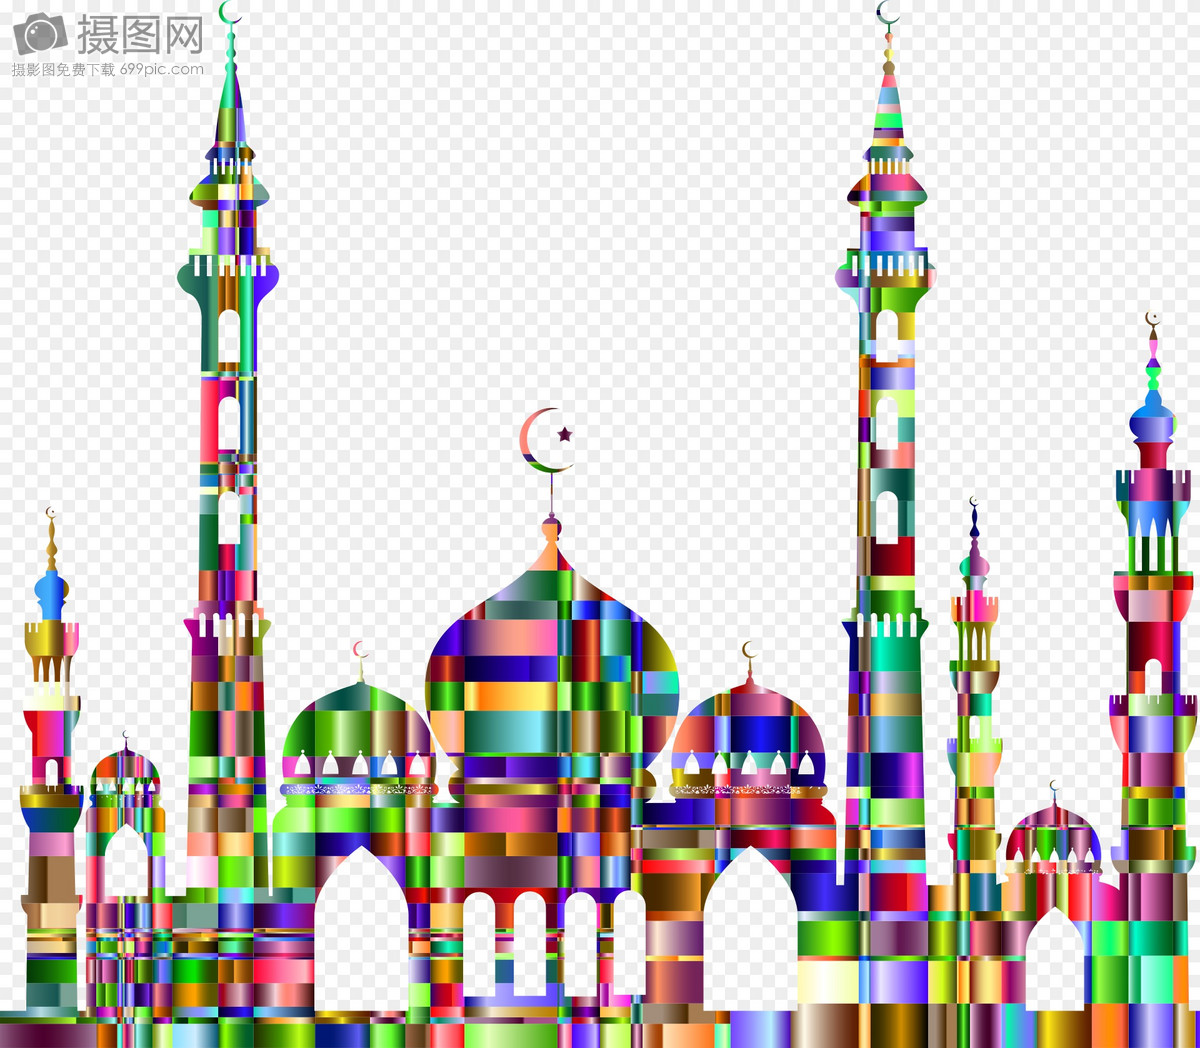 Free Mosque Clipart colourful, Download Free Clip Art on